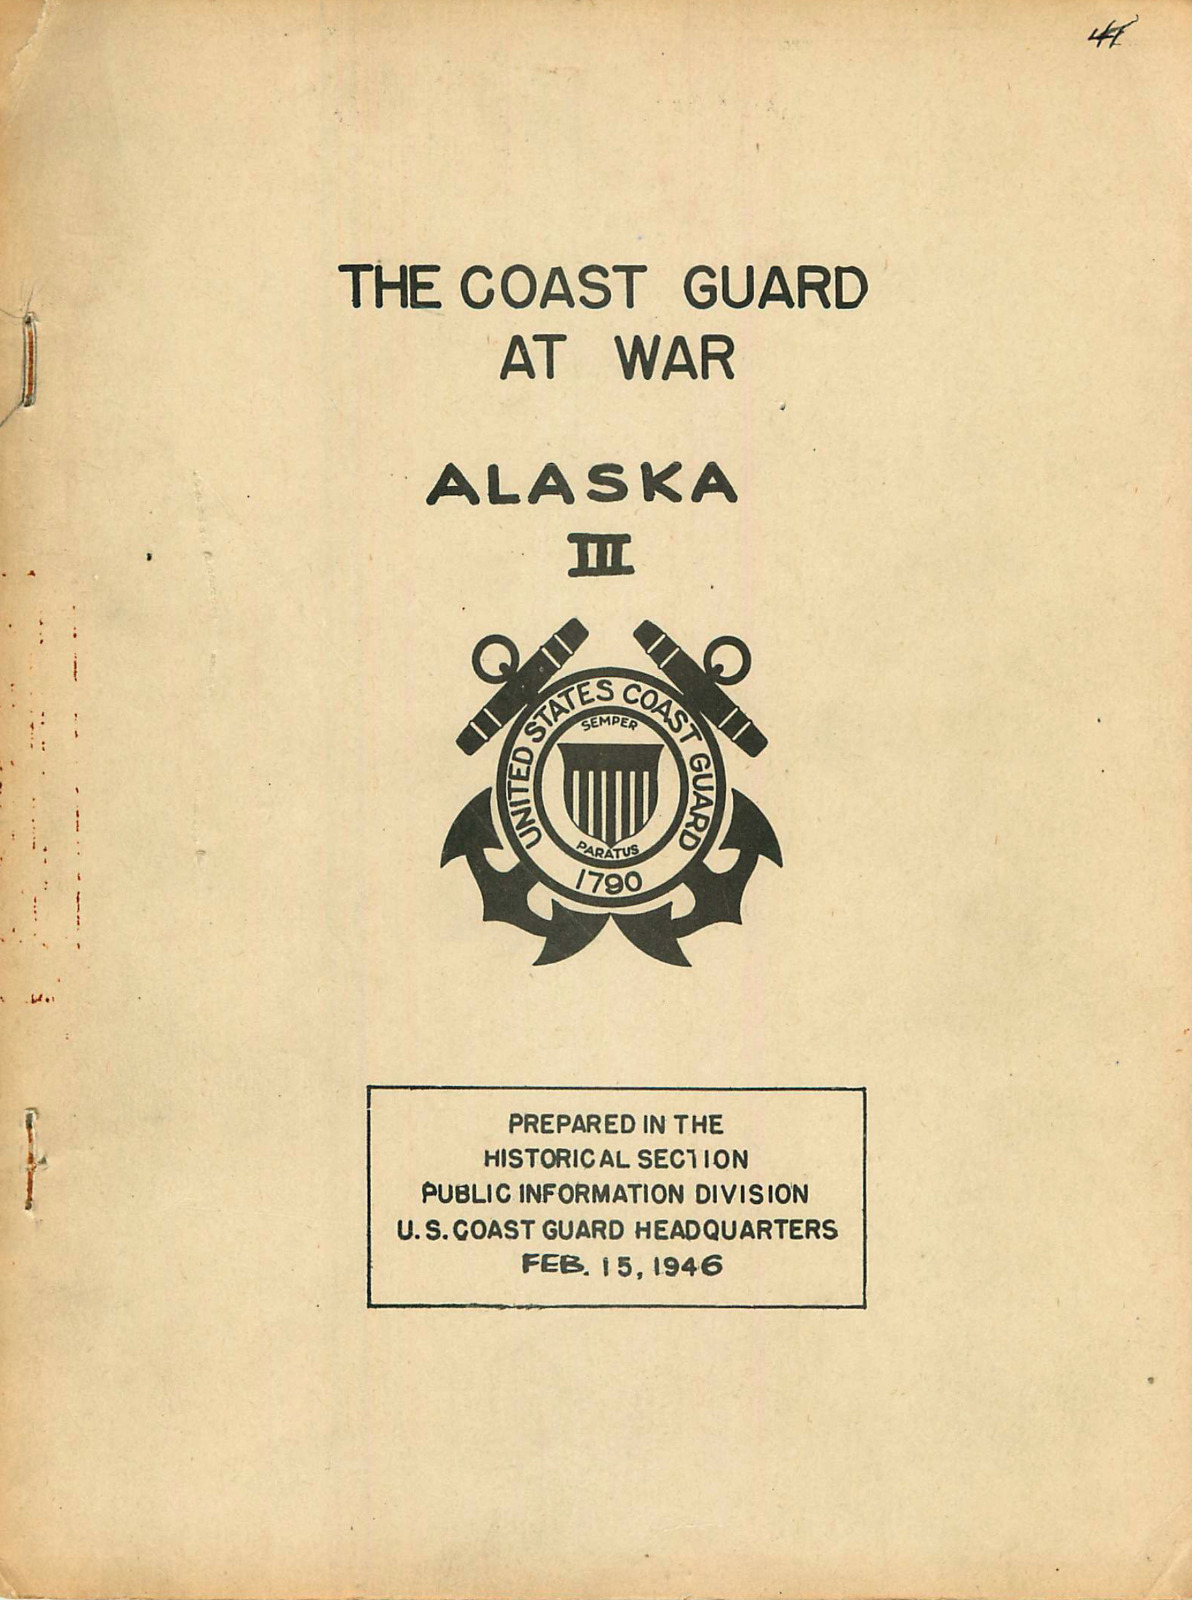 106 Page USCG AT WAR Attu Aleutians Campaign 1946 Navy History Study on Data CD